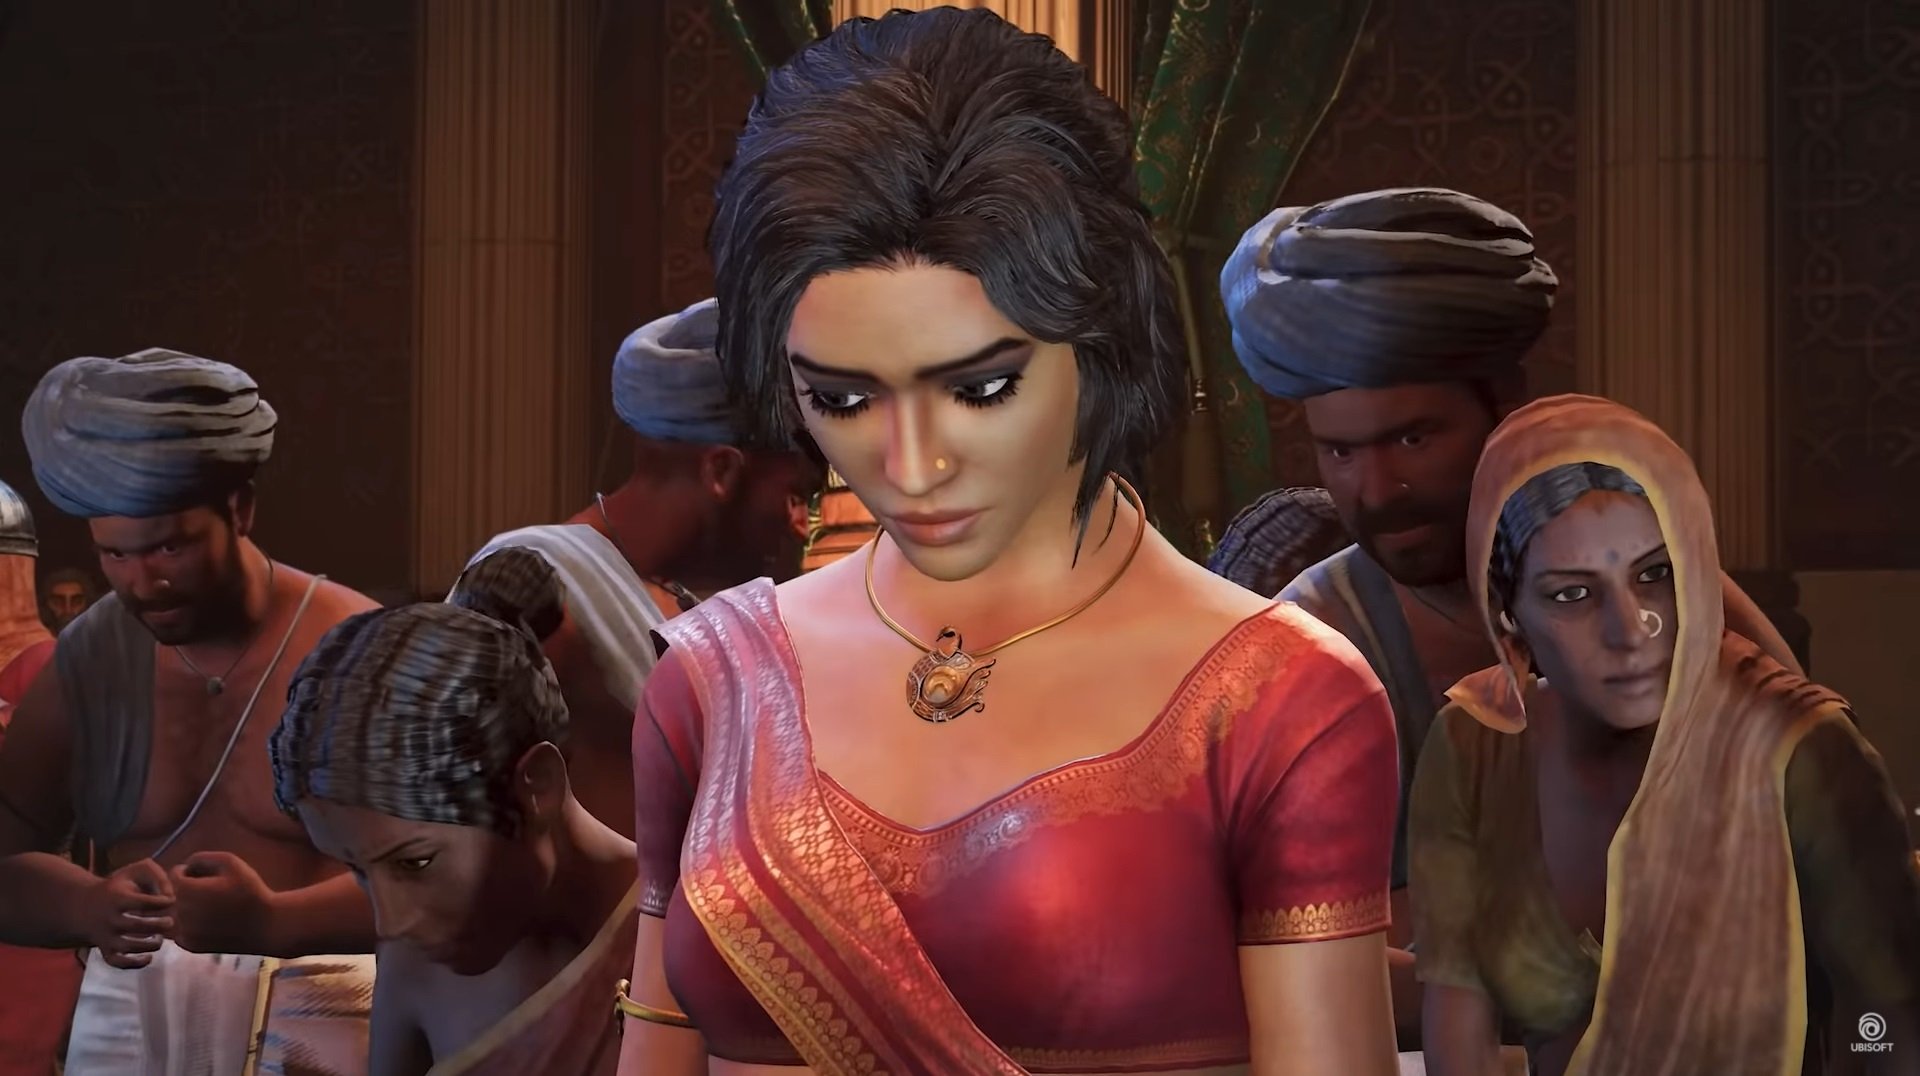 Prince-of-Persia-remake-character-double.jpg